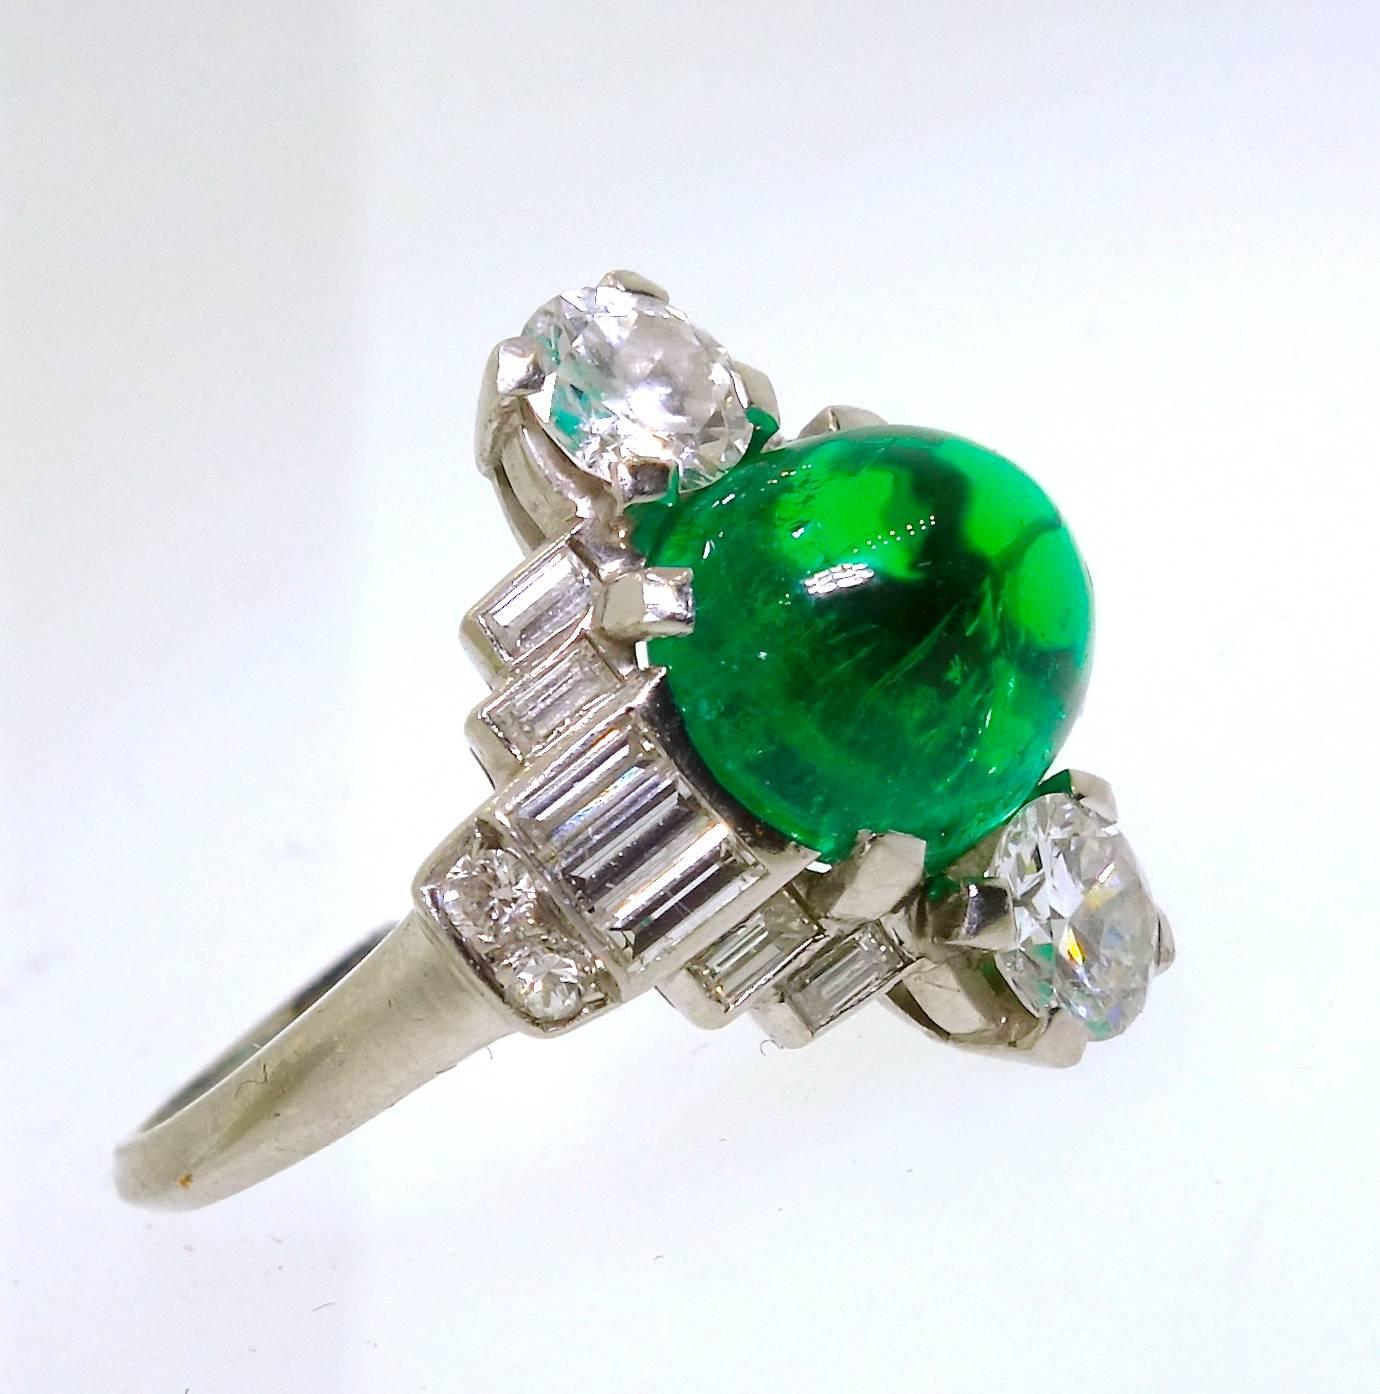 The center Colombian emerald displays a fine deep green color.  This high cabochon cut stone weighs approximately 3.5 cts.  The color is remarkable reminding one of a small green "jelly bean".  Fine baguette cut diamonds and round diamonds